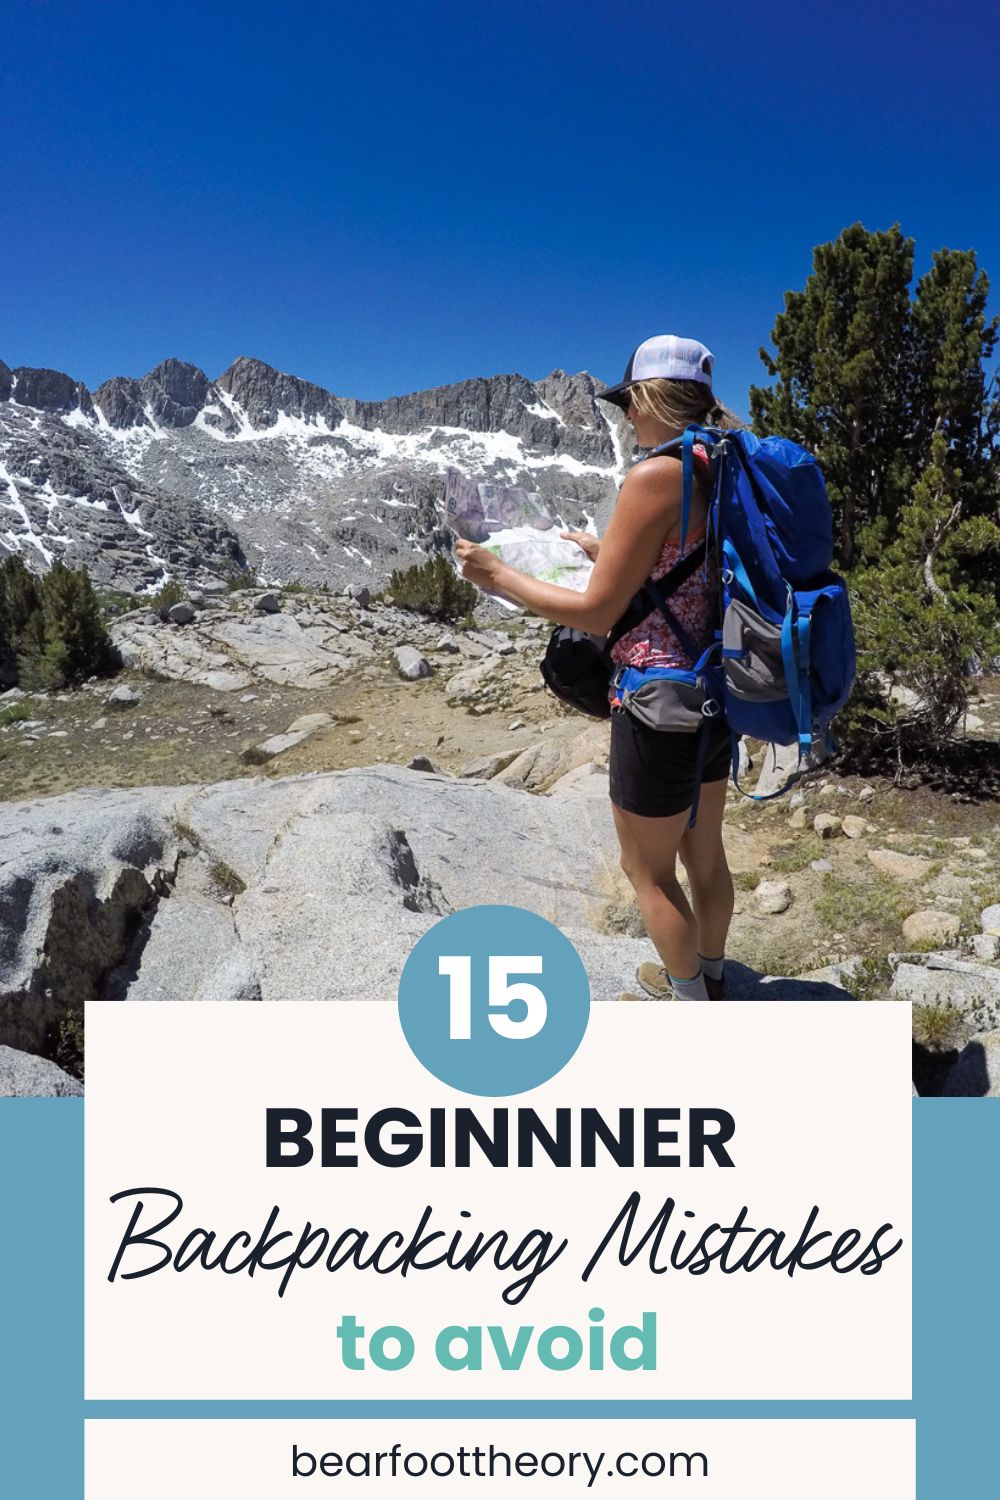 Don't let common beginner backpacking mistakes spoil your outdoor adventure. Our latest blog post breaks down the most common mistakes beginners make when hitting the trail for the first time, and gives actionable tips to avoid them. Learn about smart packing, essential gear, adequate food and water planning, and so much more. Say goodbye to unpreparedness, and say hello to mastering backpacking basics!